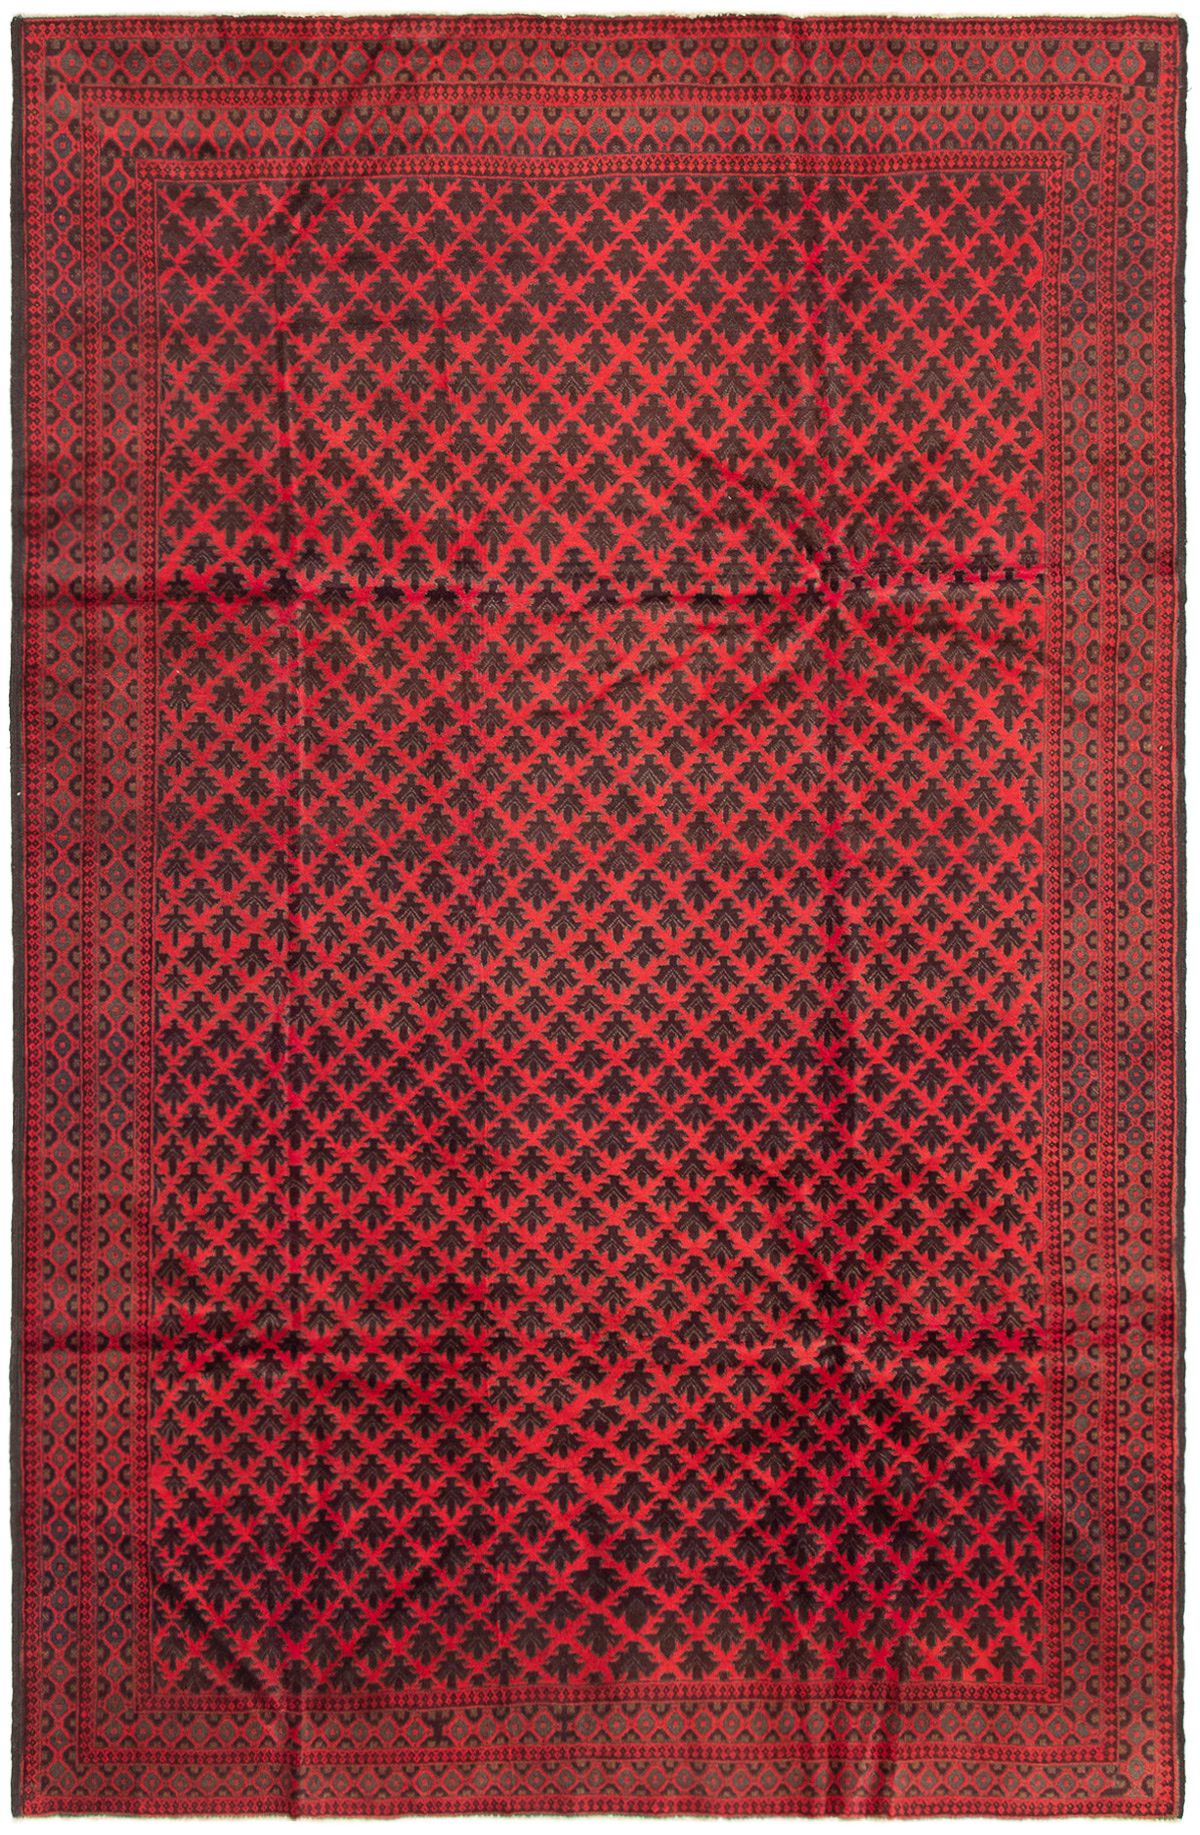 Hand-knotted Rizbaft Red Wool Rug 6'6" x 10'1" Size: 6'6" x 10'1"  